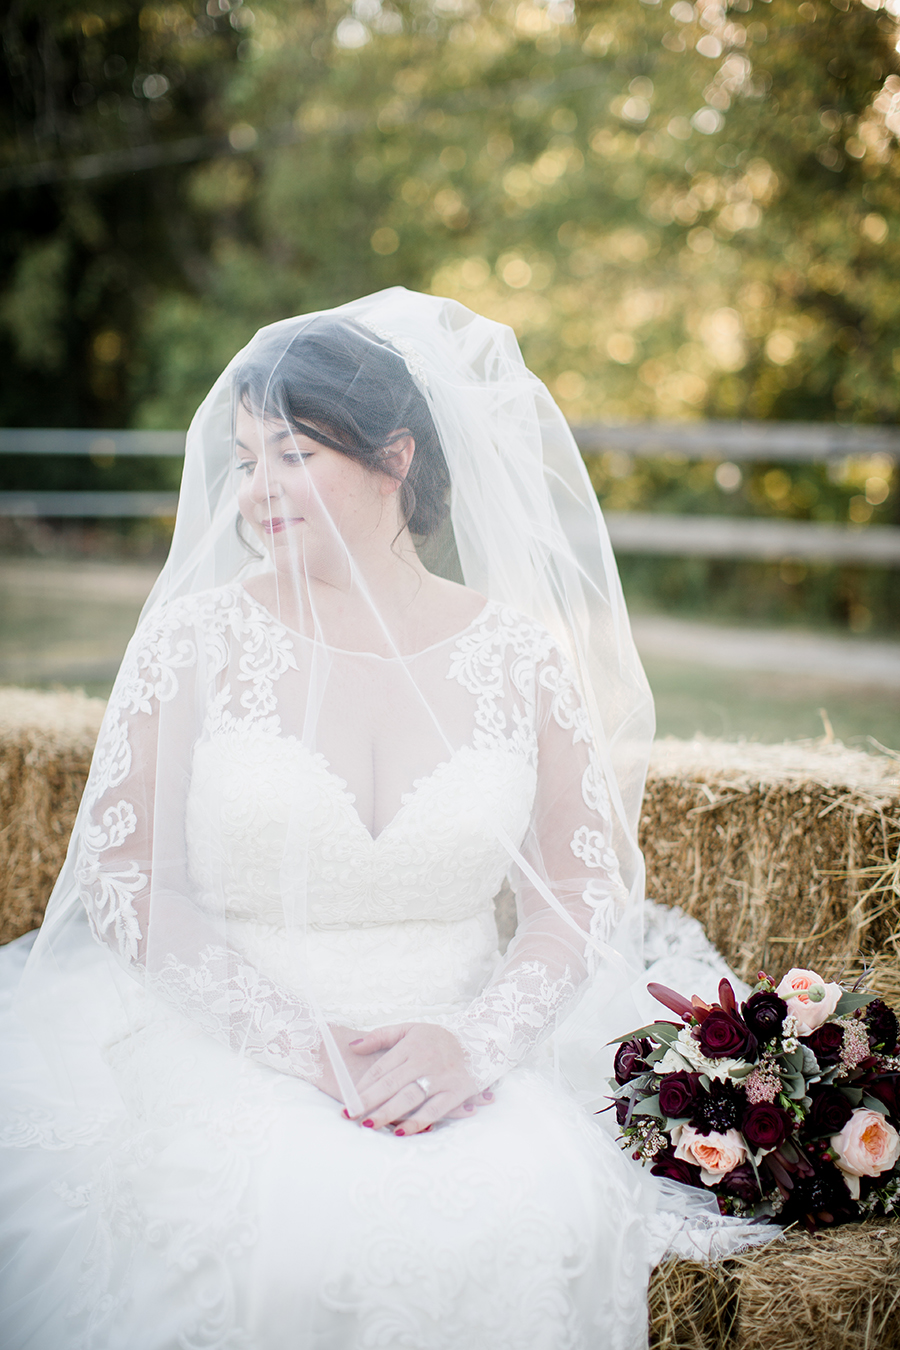 Veil over her face at this bridal session at The Barn at High Point Farms by Knoxville Wedding Photographer, Amanda May Photos.